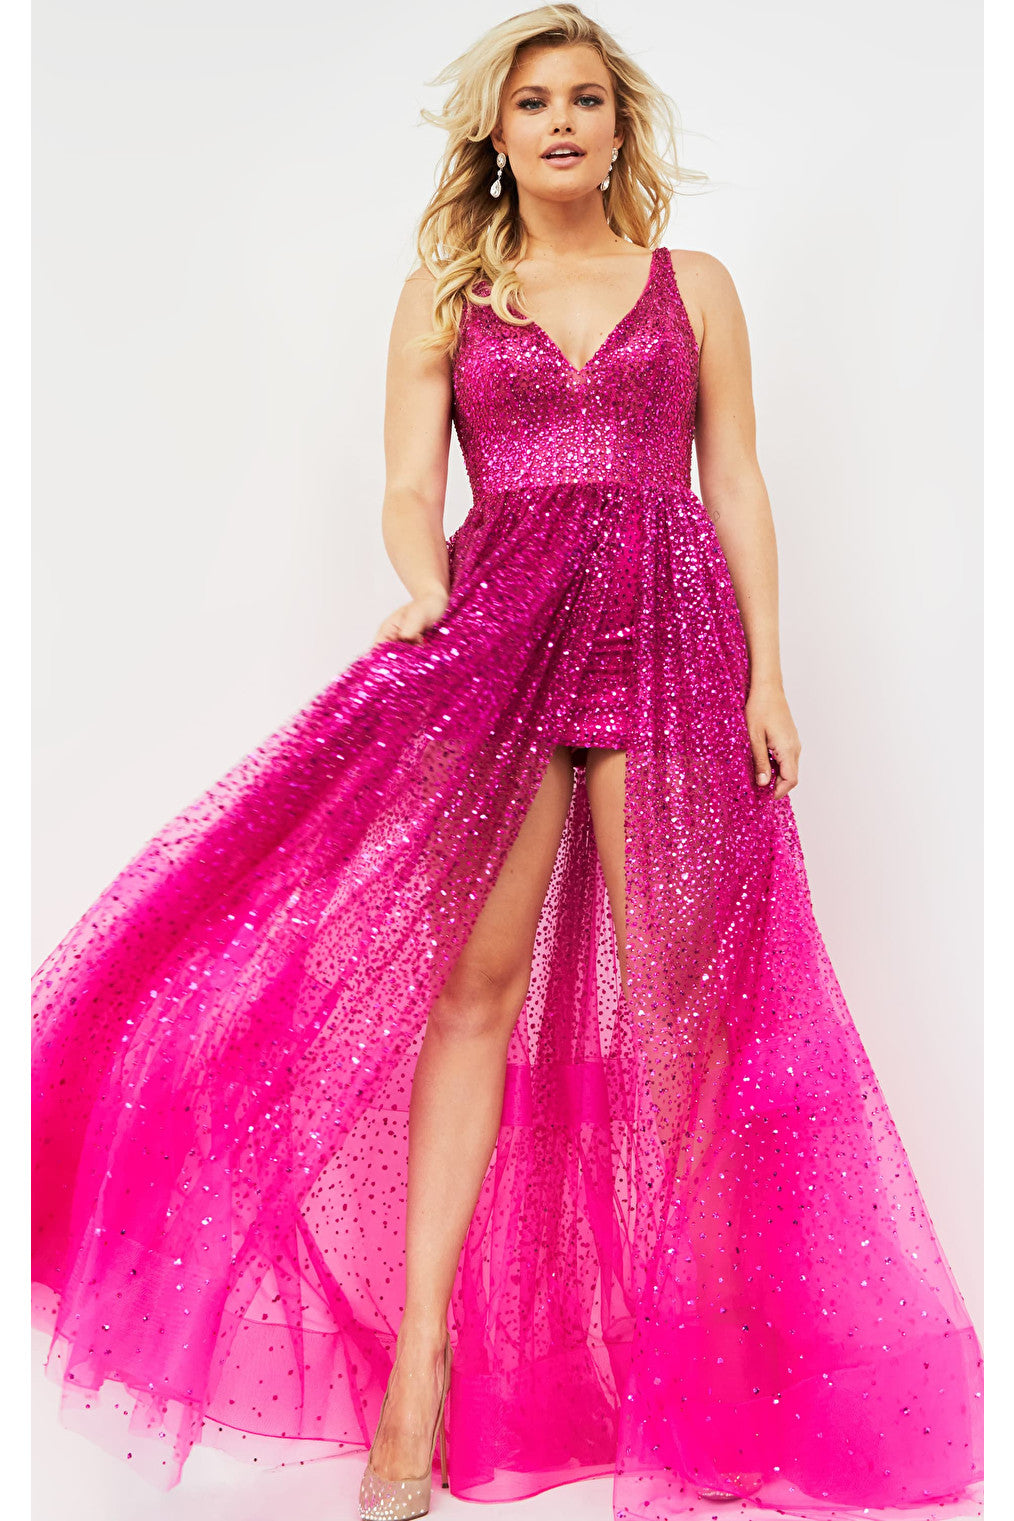 Hotfix Rhinestones and Prom Dresses: Add Sparkle to a Magical Night